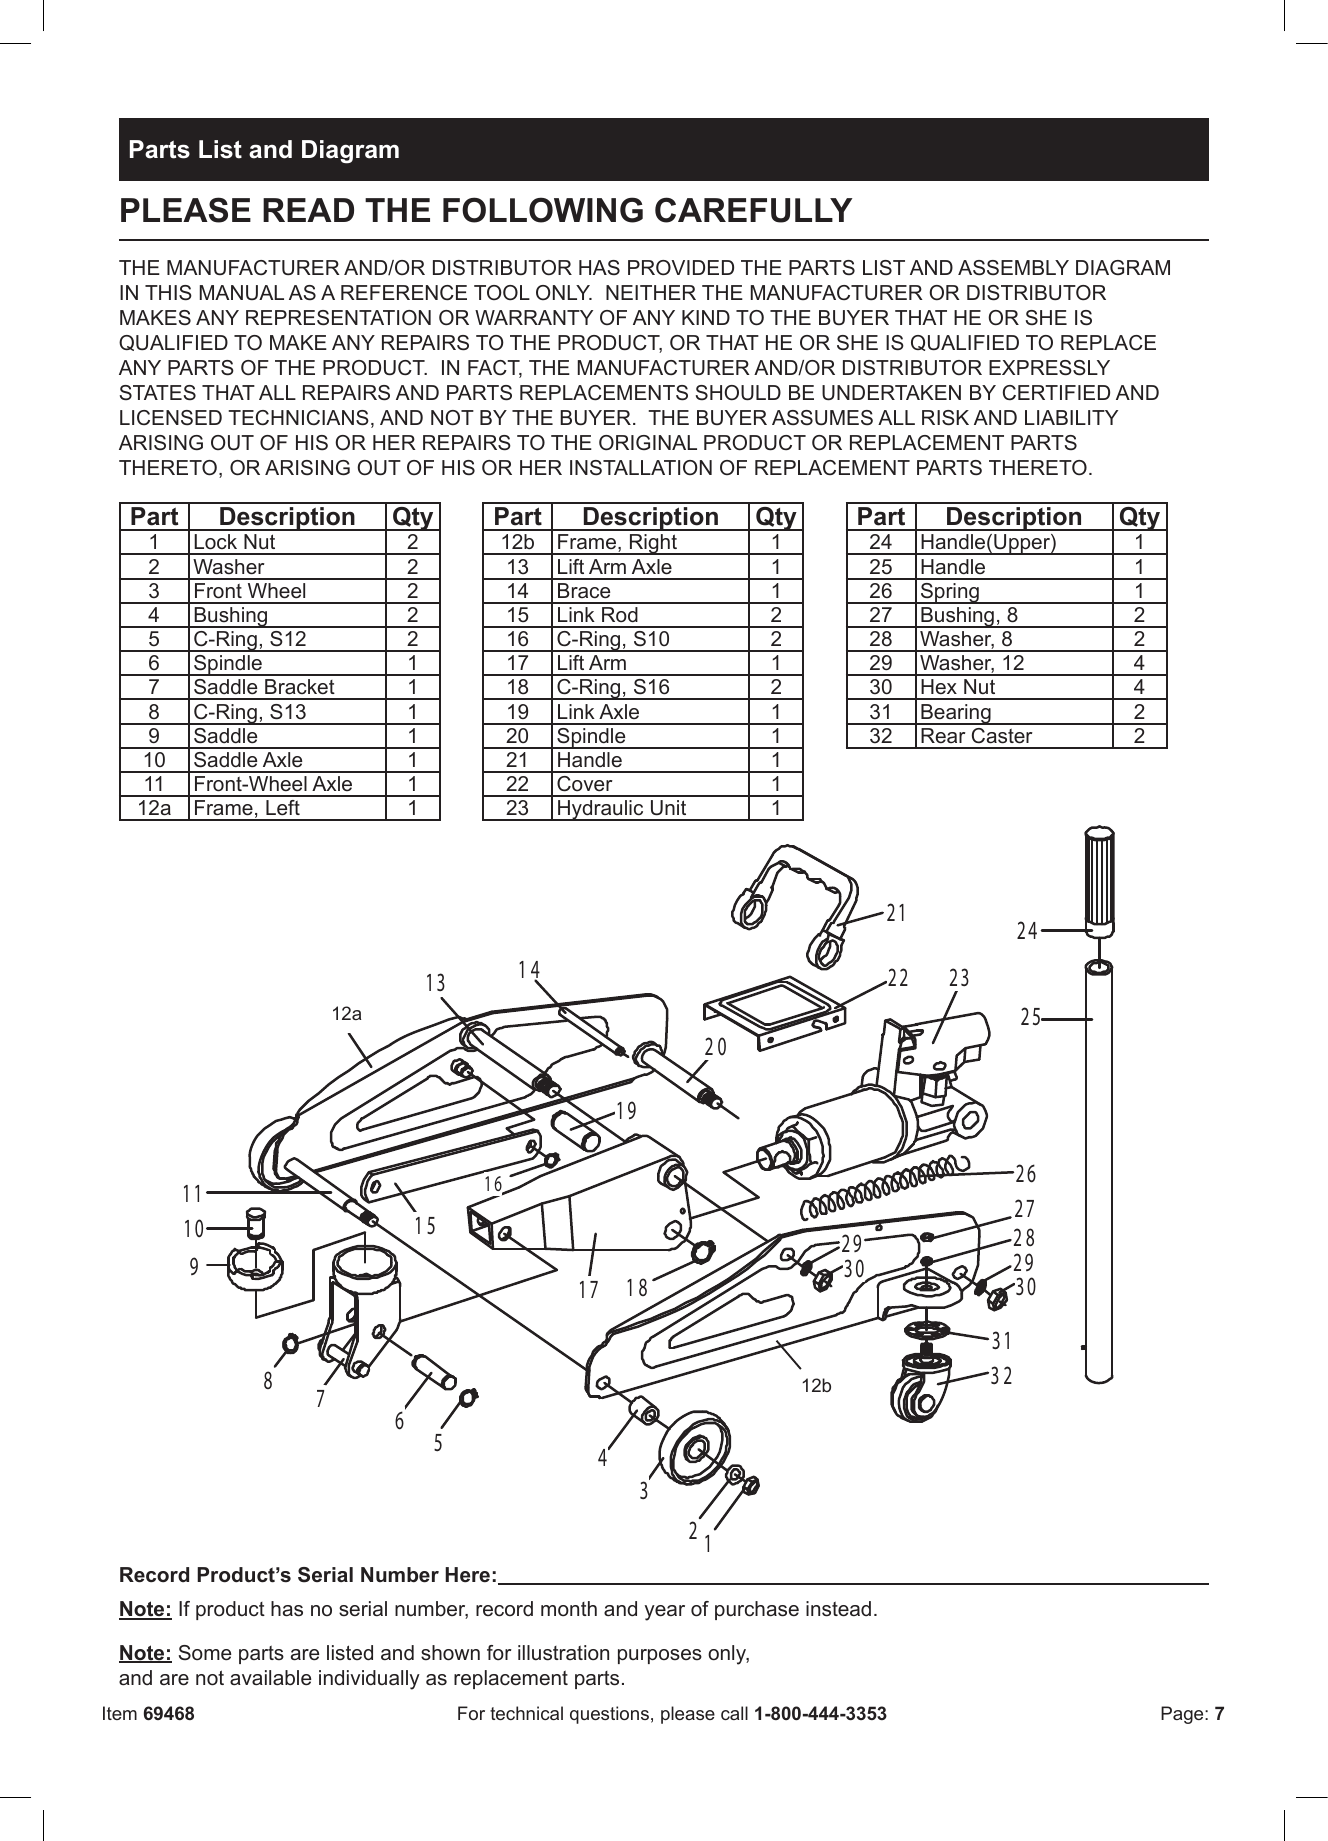 Page 7 of 8 - Harbor-Freight Harbor-Freight-69468-Owner-S-Manual